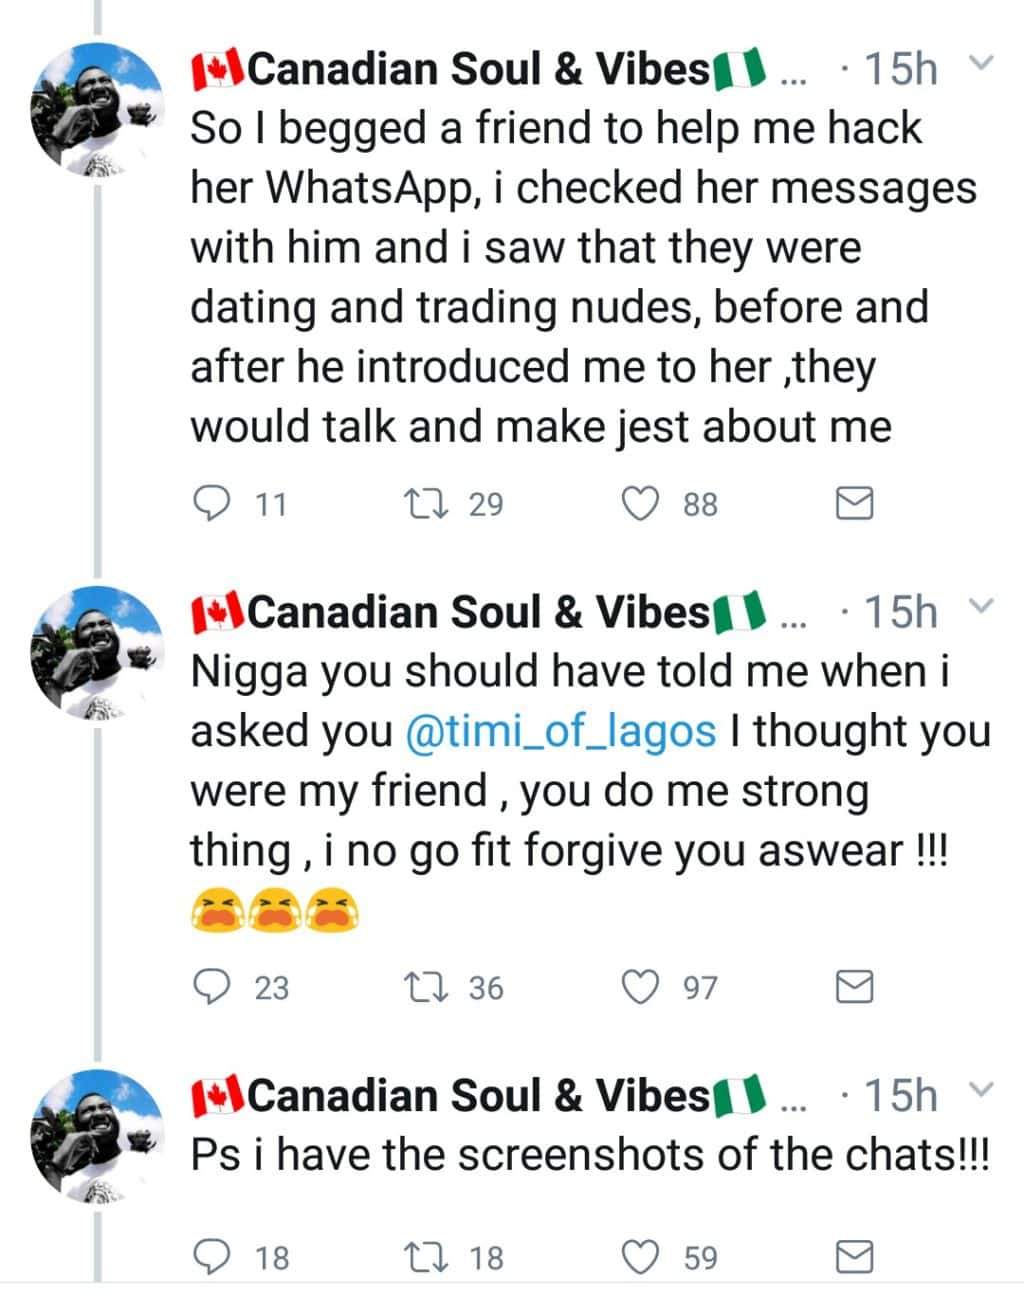 'Beware of your girlfriend's BFF!'- Twitter user narrates how his girlfriend played him